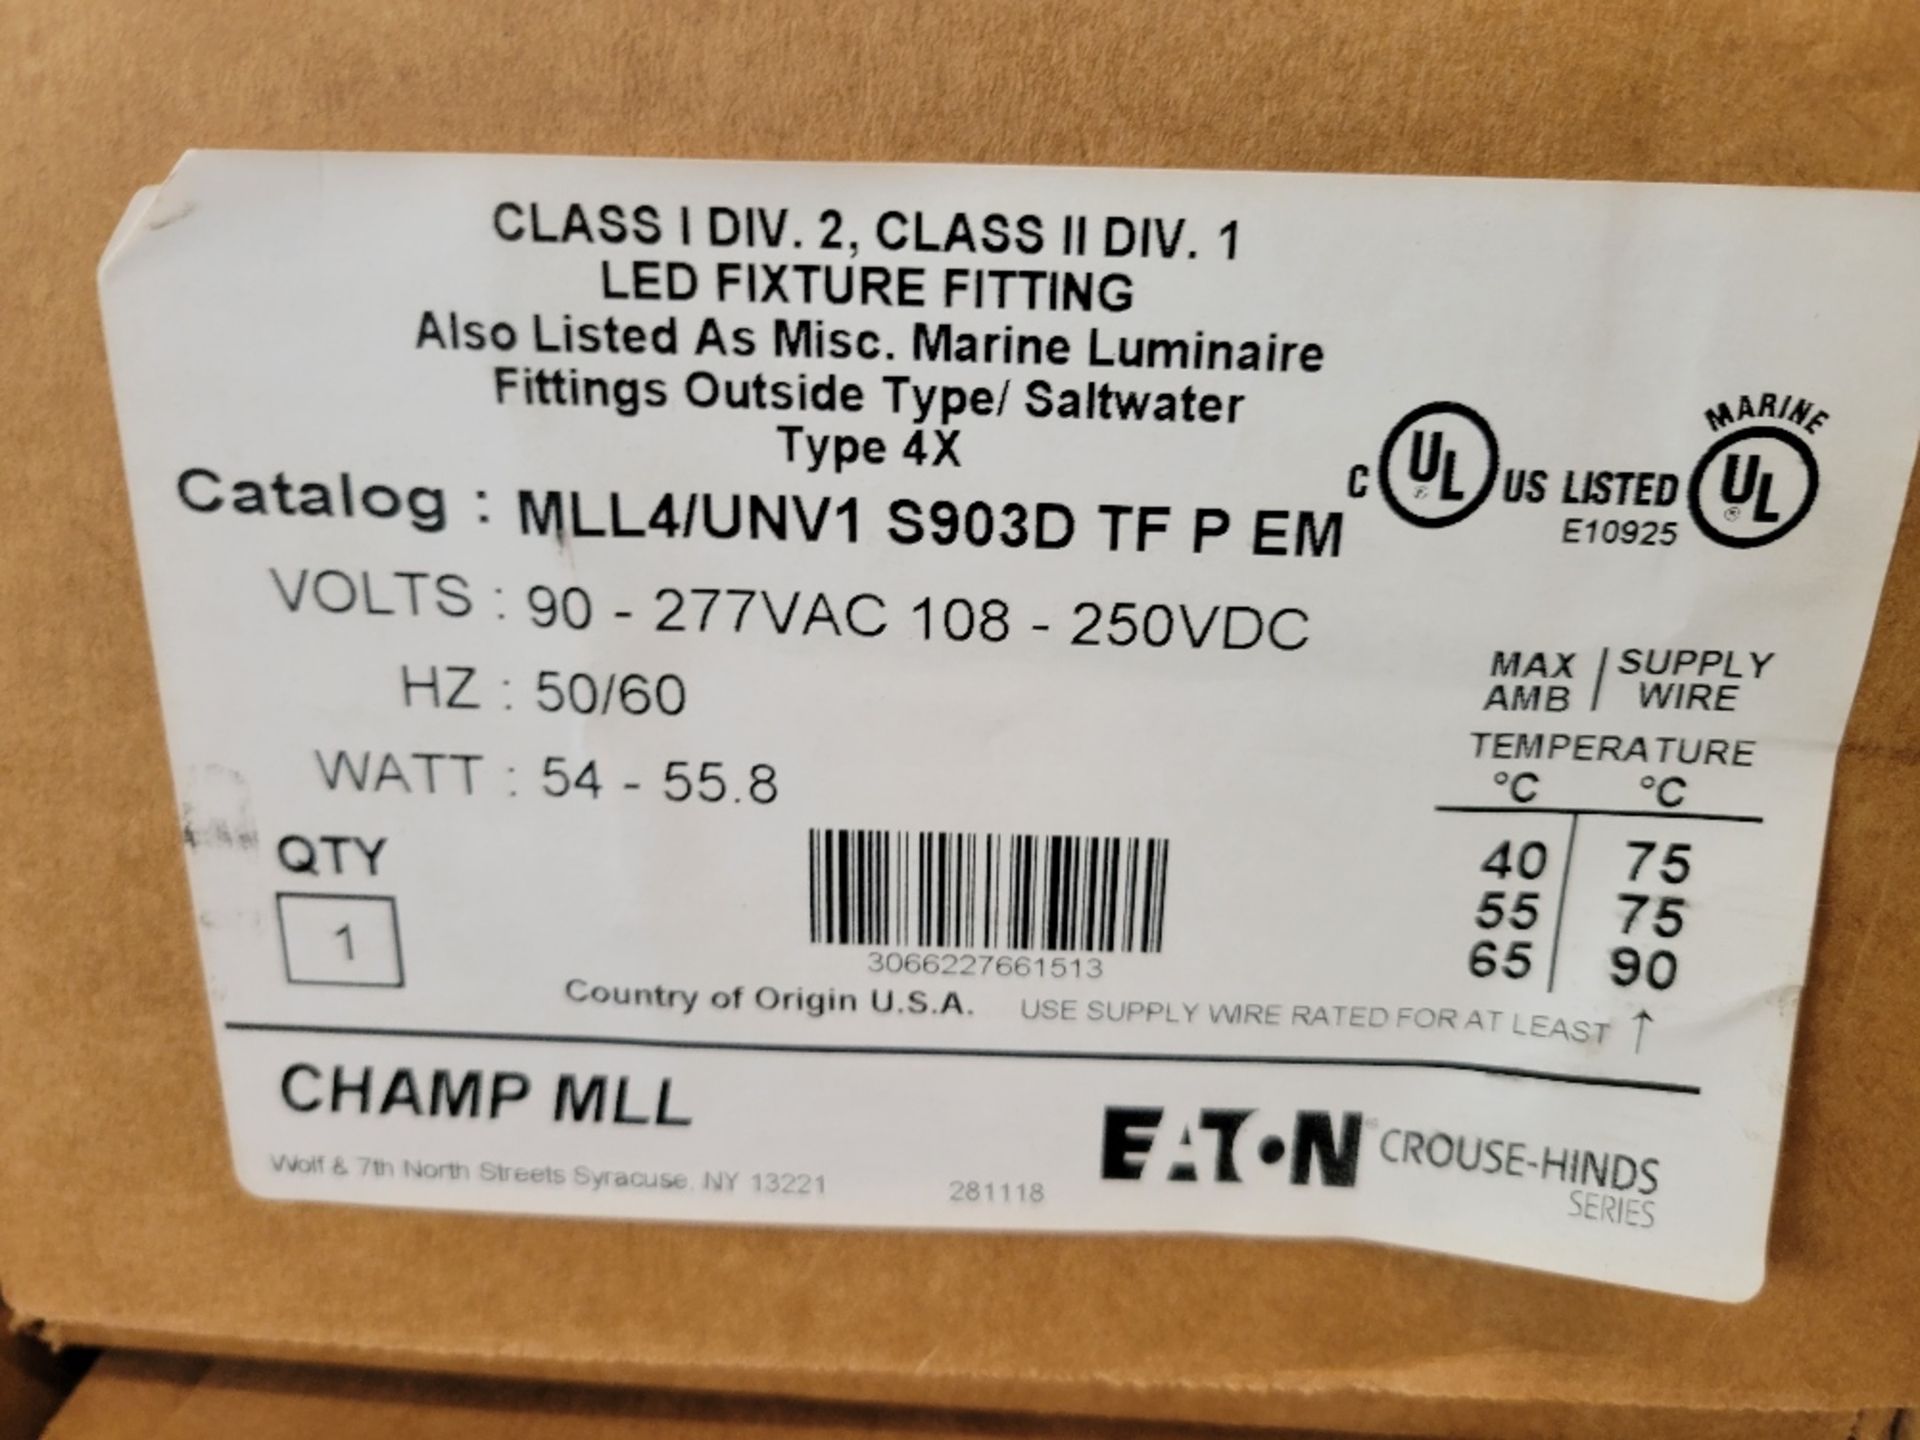 3x Eaton MLL4/UNV1S903DTFPEM Miniature and Specialty Bulbs Champ MLL Linear Luminare 277V 55W Gray N